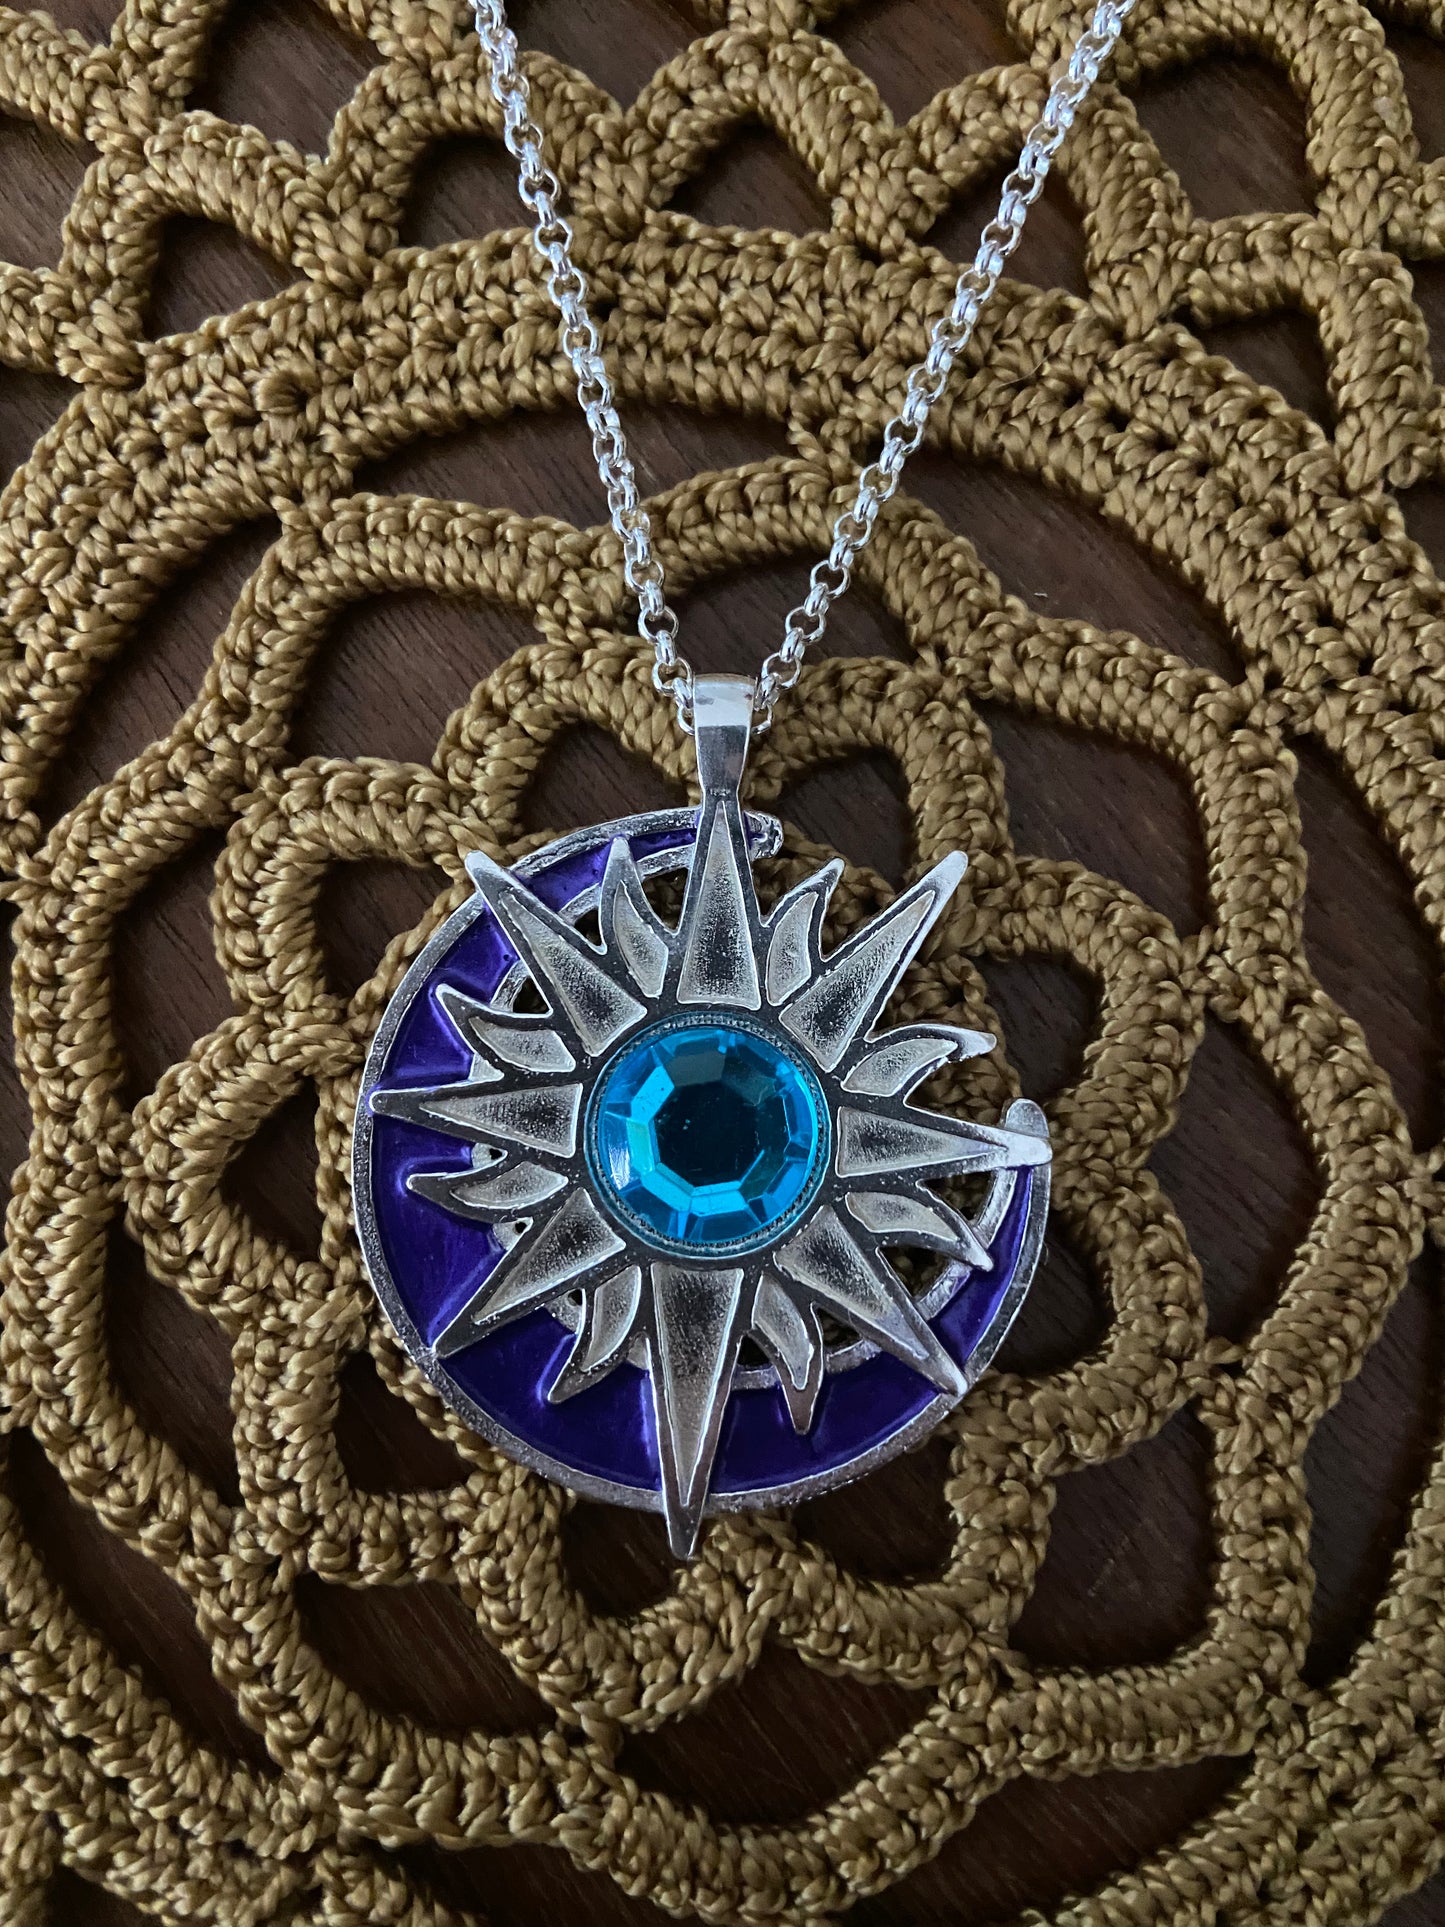 Sterling Silver Handmade Bright finish Twitches Sun/Moon Pendant “15 year anniversary edition”